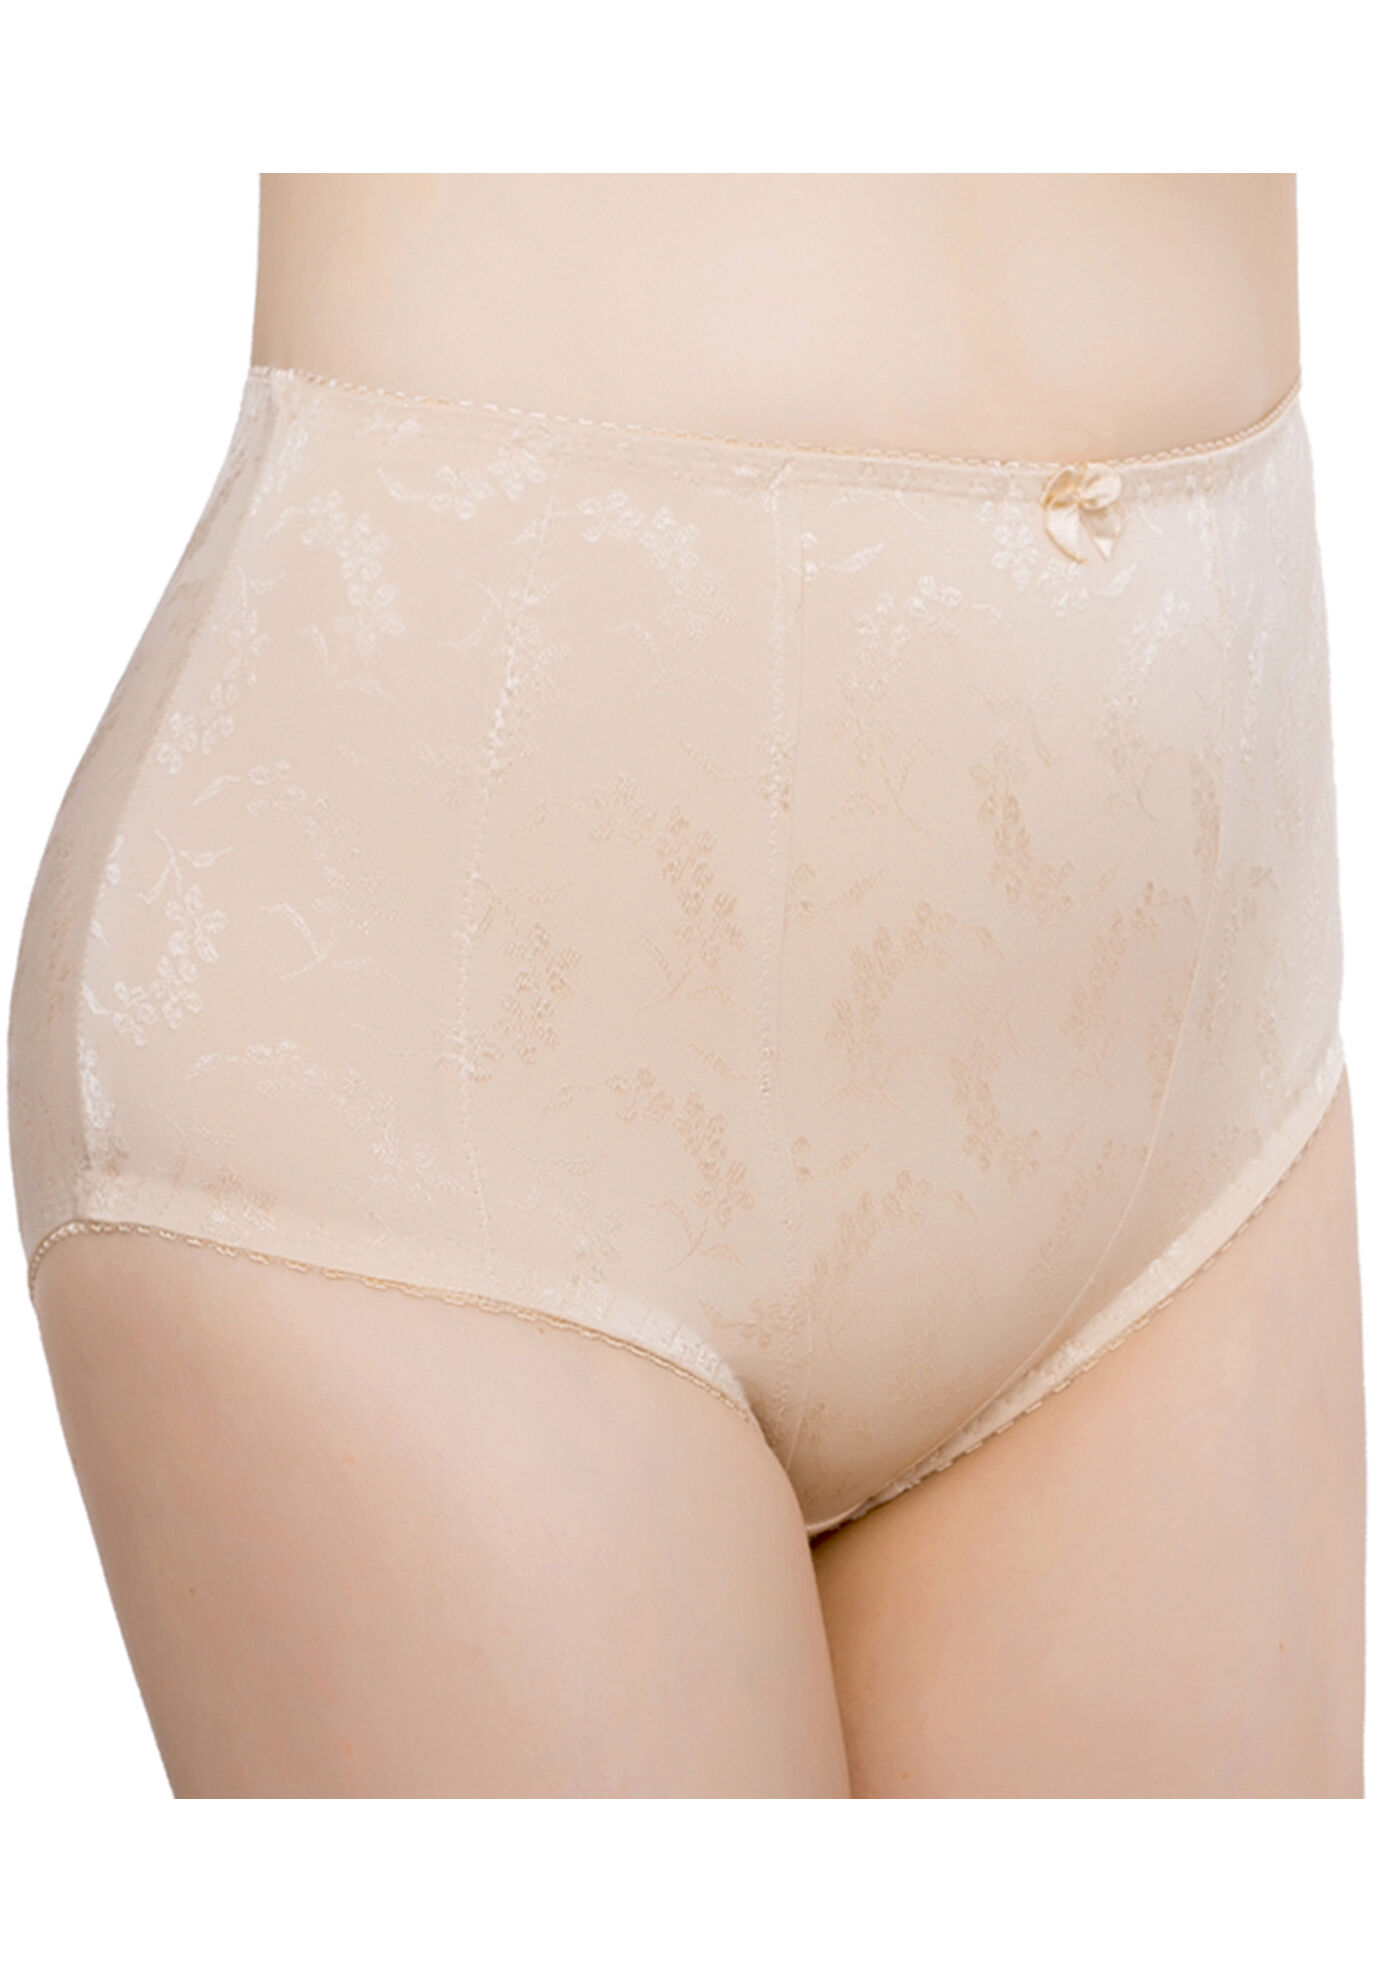 Plus Size Women's 2-Pack Floral Jacquard Shaping Panties by Exquisite Form in Nude (Size 5XL)